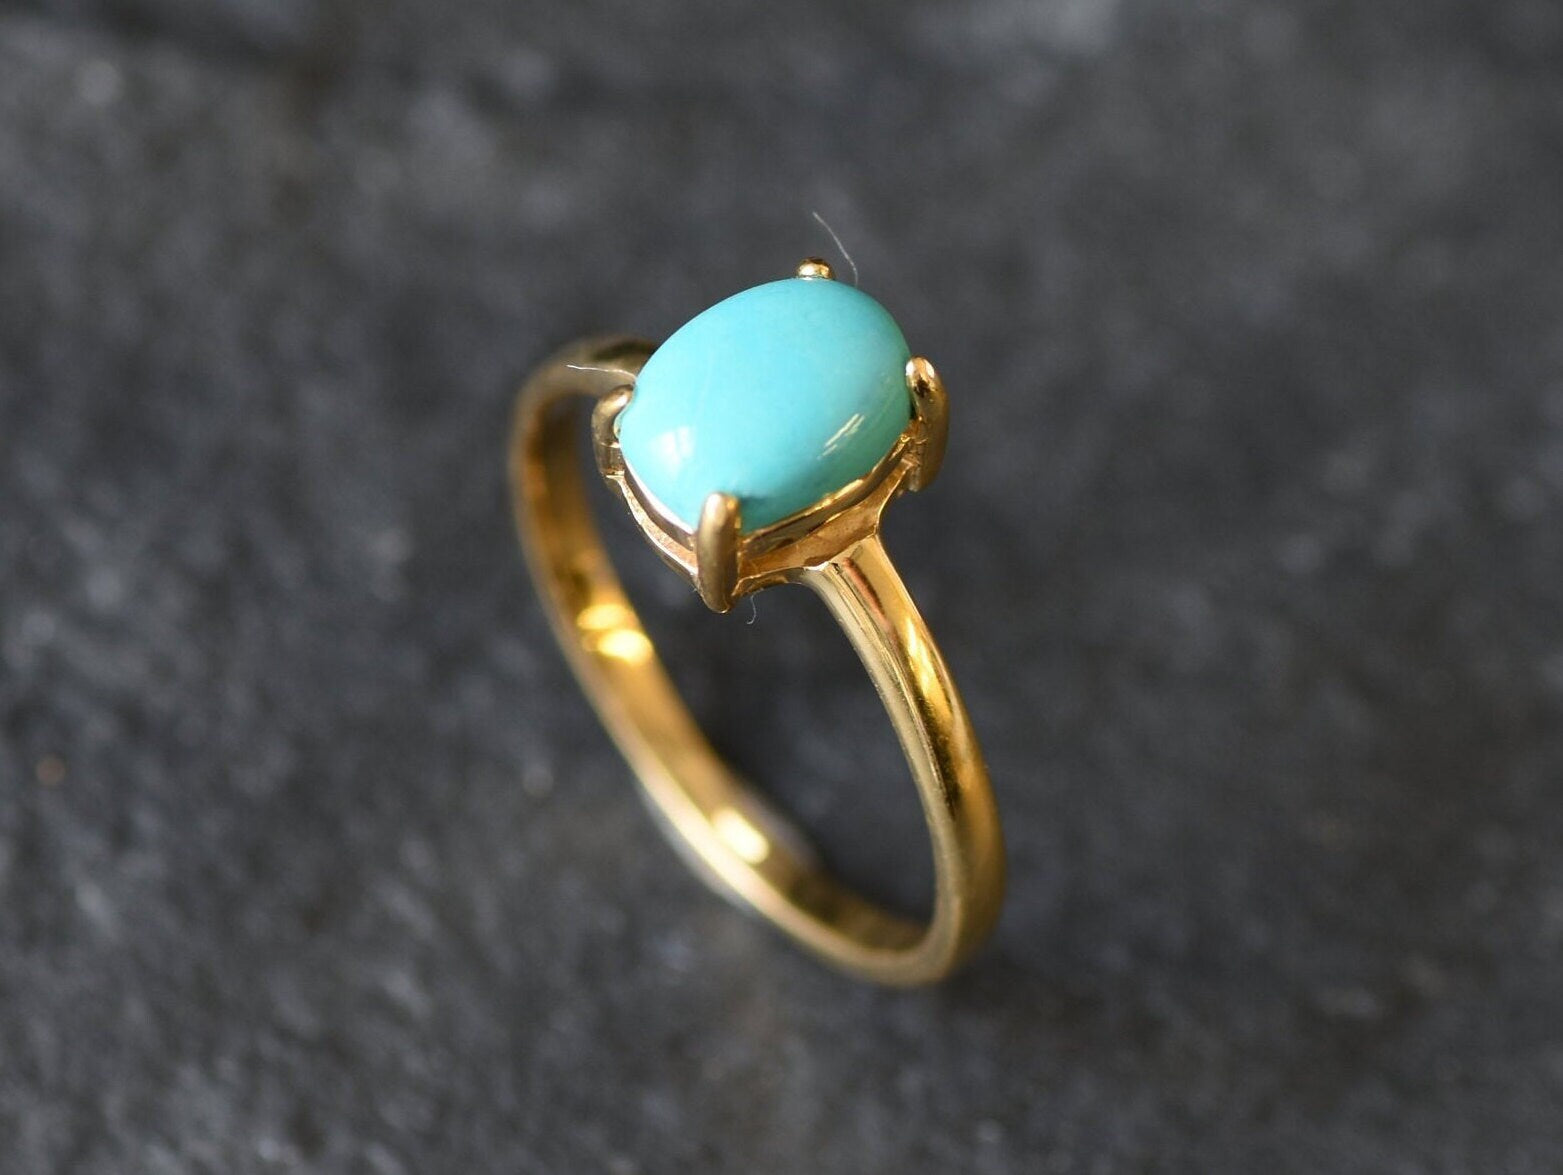 Turquoise Ring, Natural Turquoise, December Birthstone, Blue Solitaire Ring, Blue Vintage Ring, Dainty Blue Ring, Blue Ring, 925 Silver Ring